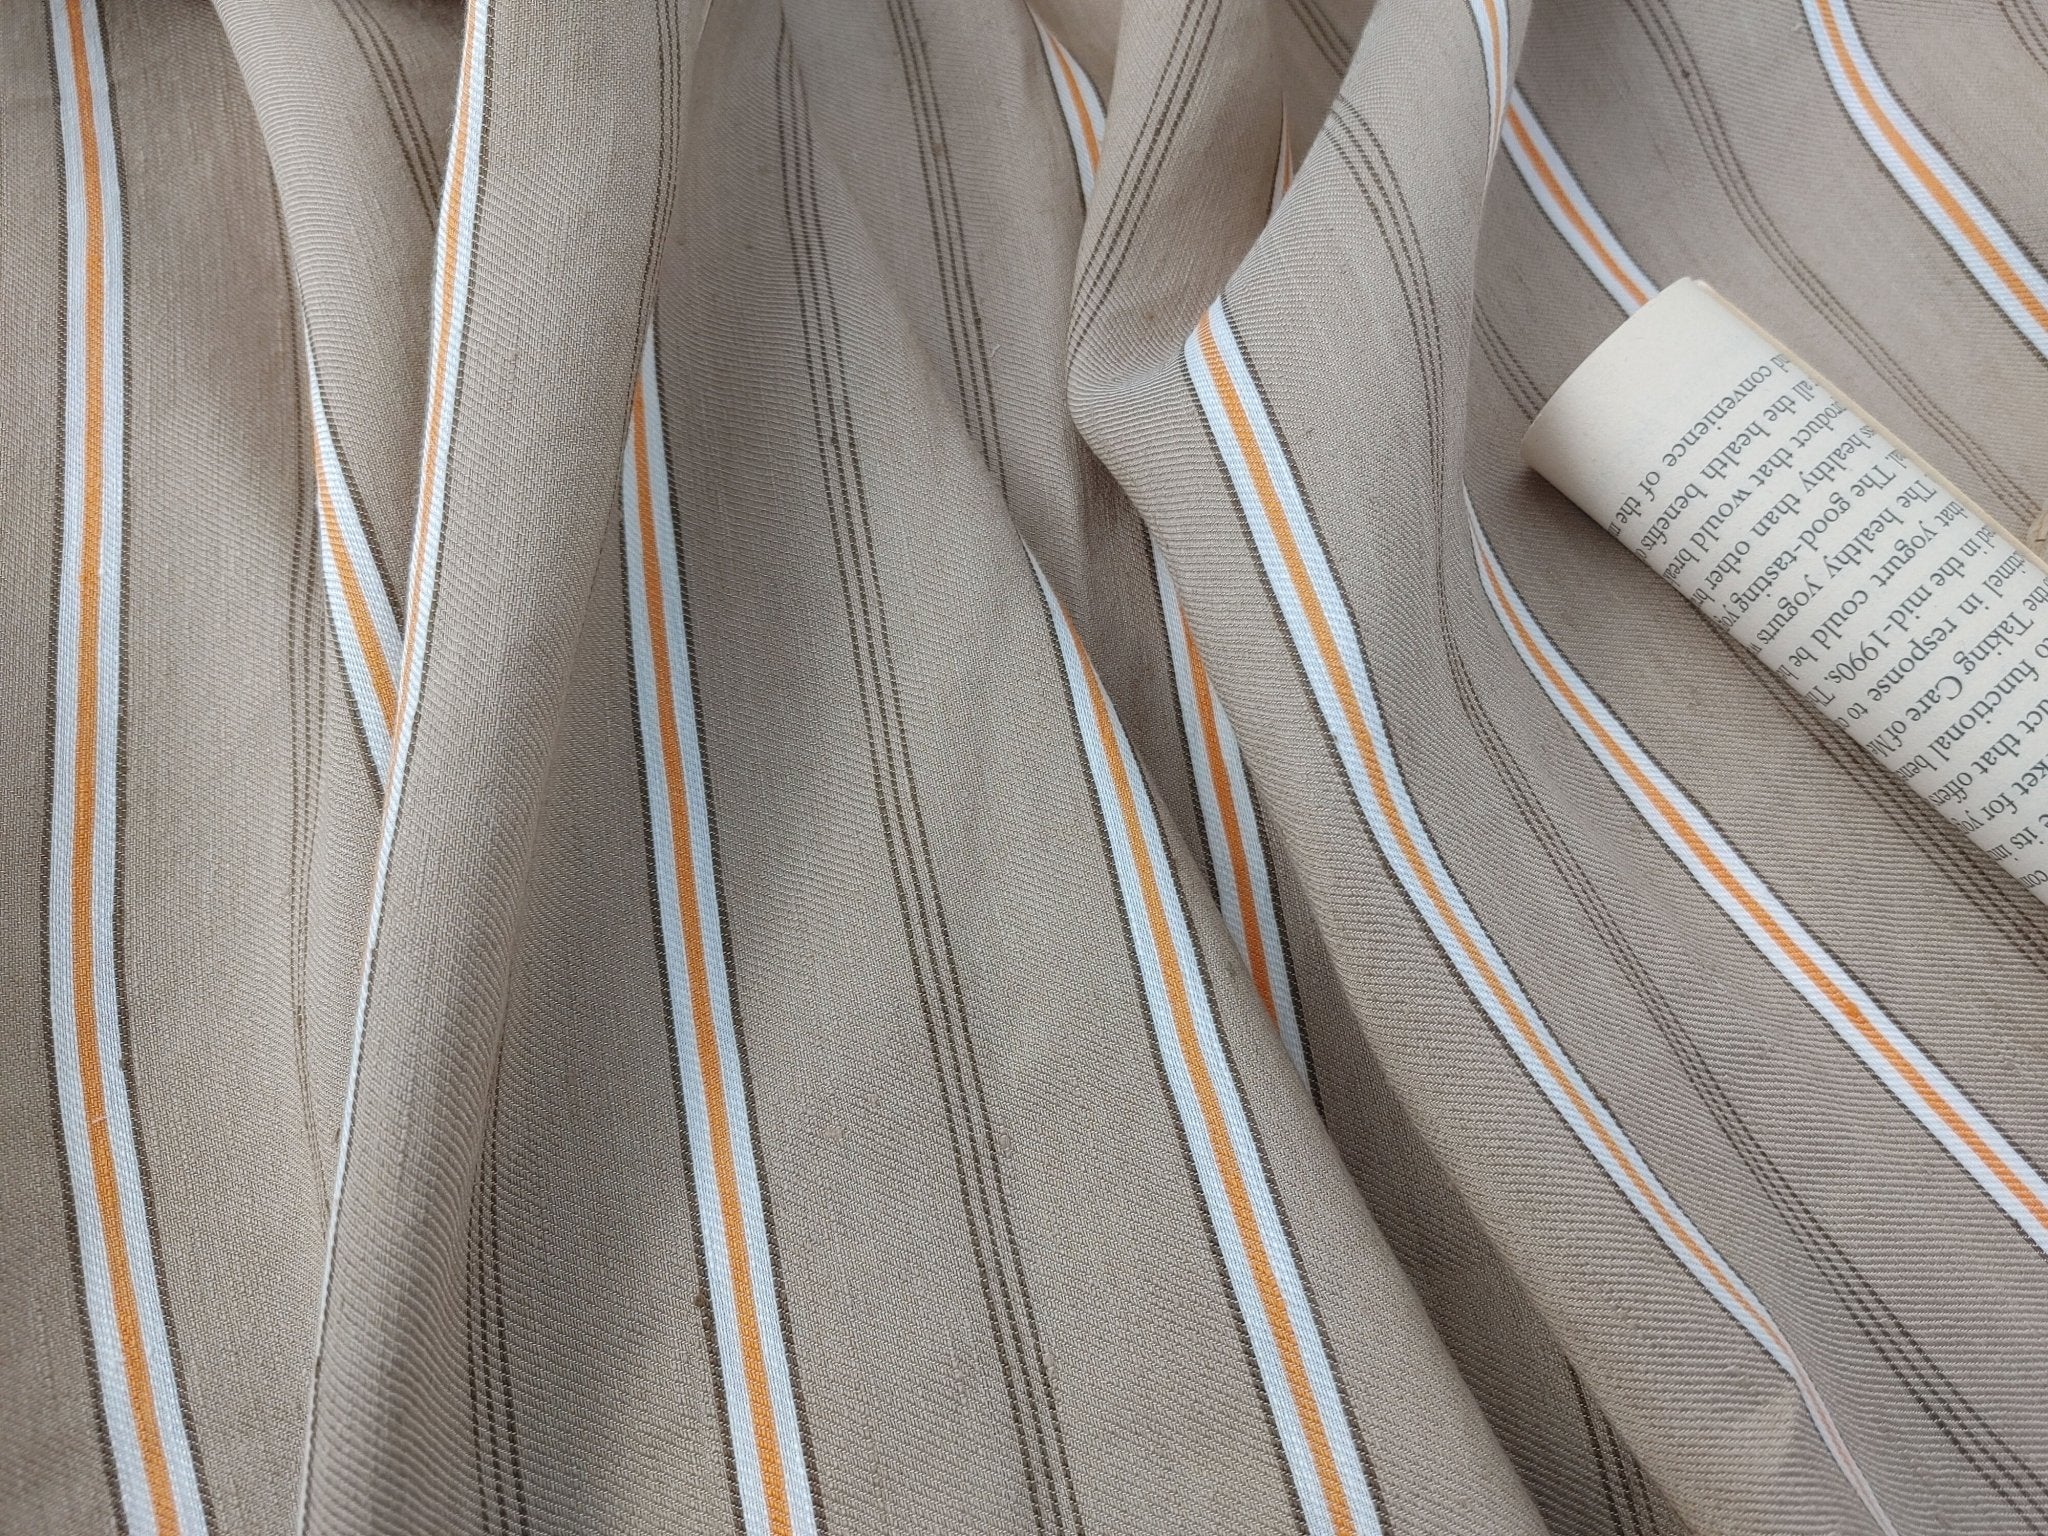 Linen Rayon Twill Fabric with Stripe Pattern, Subtle Glossy Effect 6809 6810 7154 - The Linen Lab - Beige